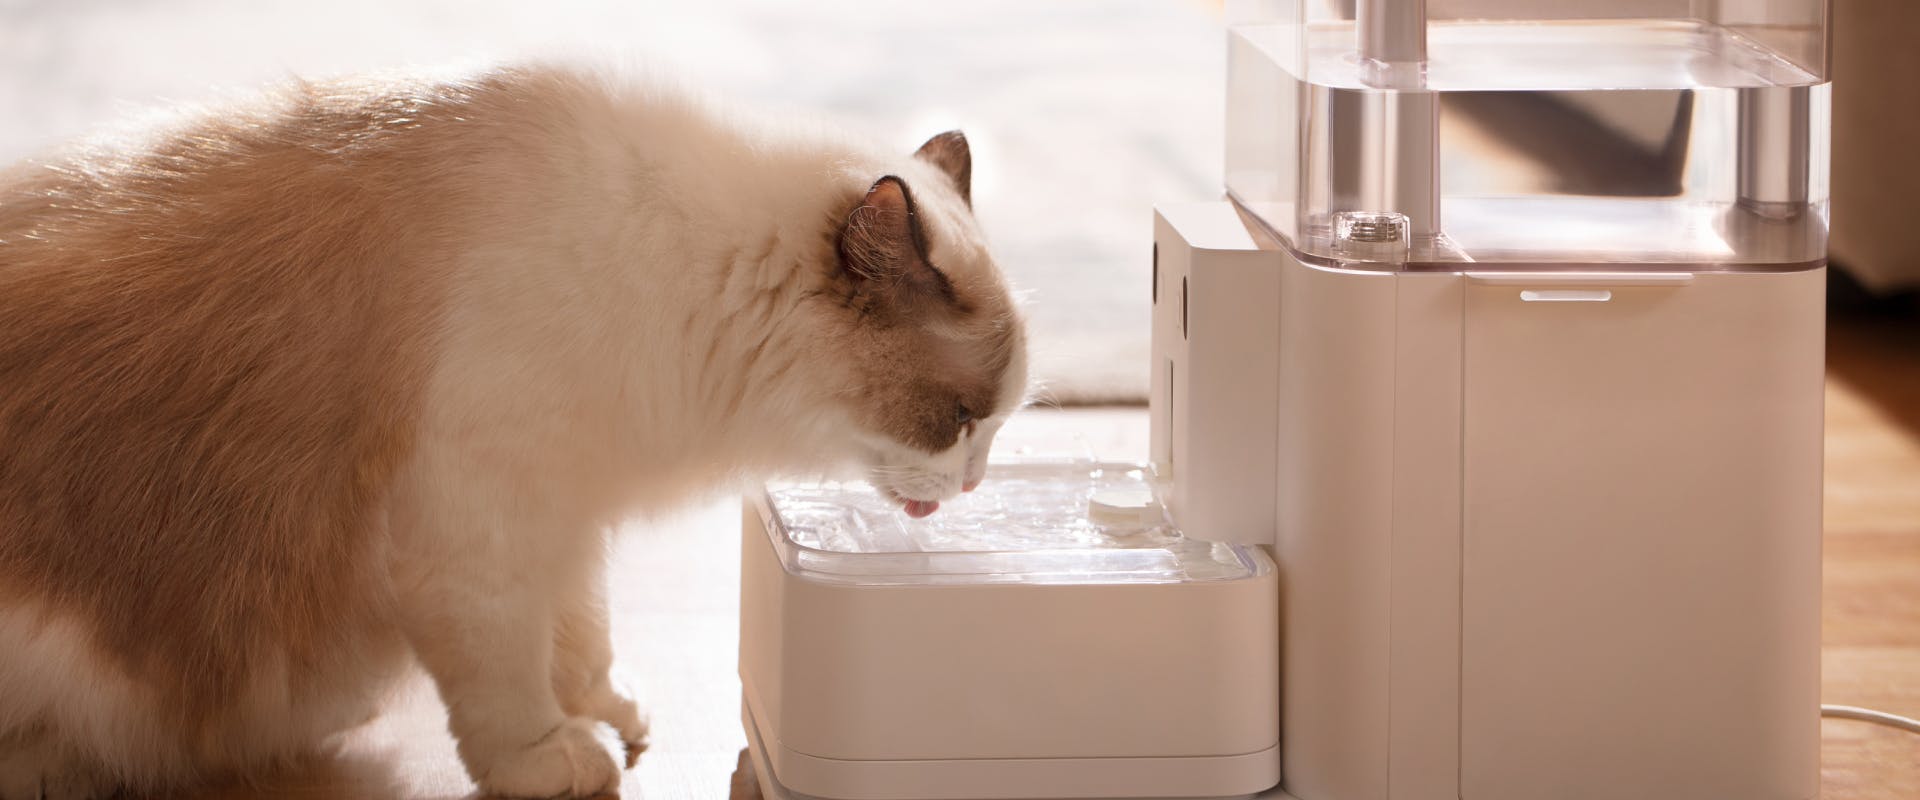 a dehydrated cat drinking from a white cat water dispenser